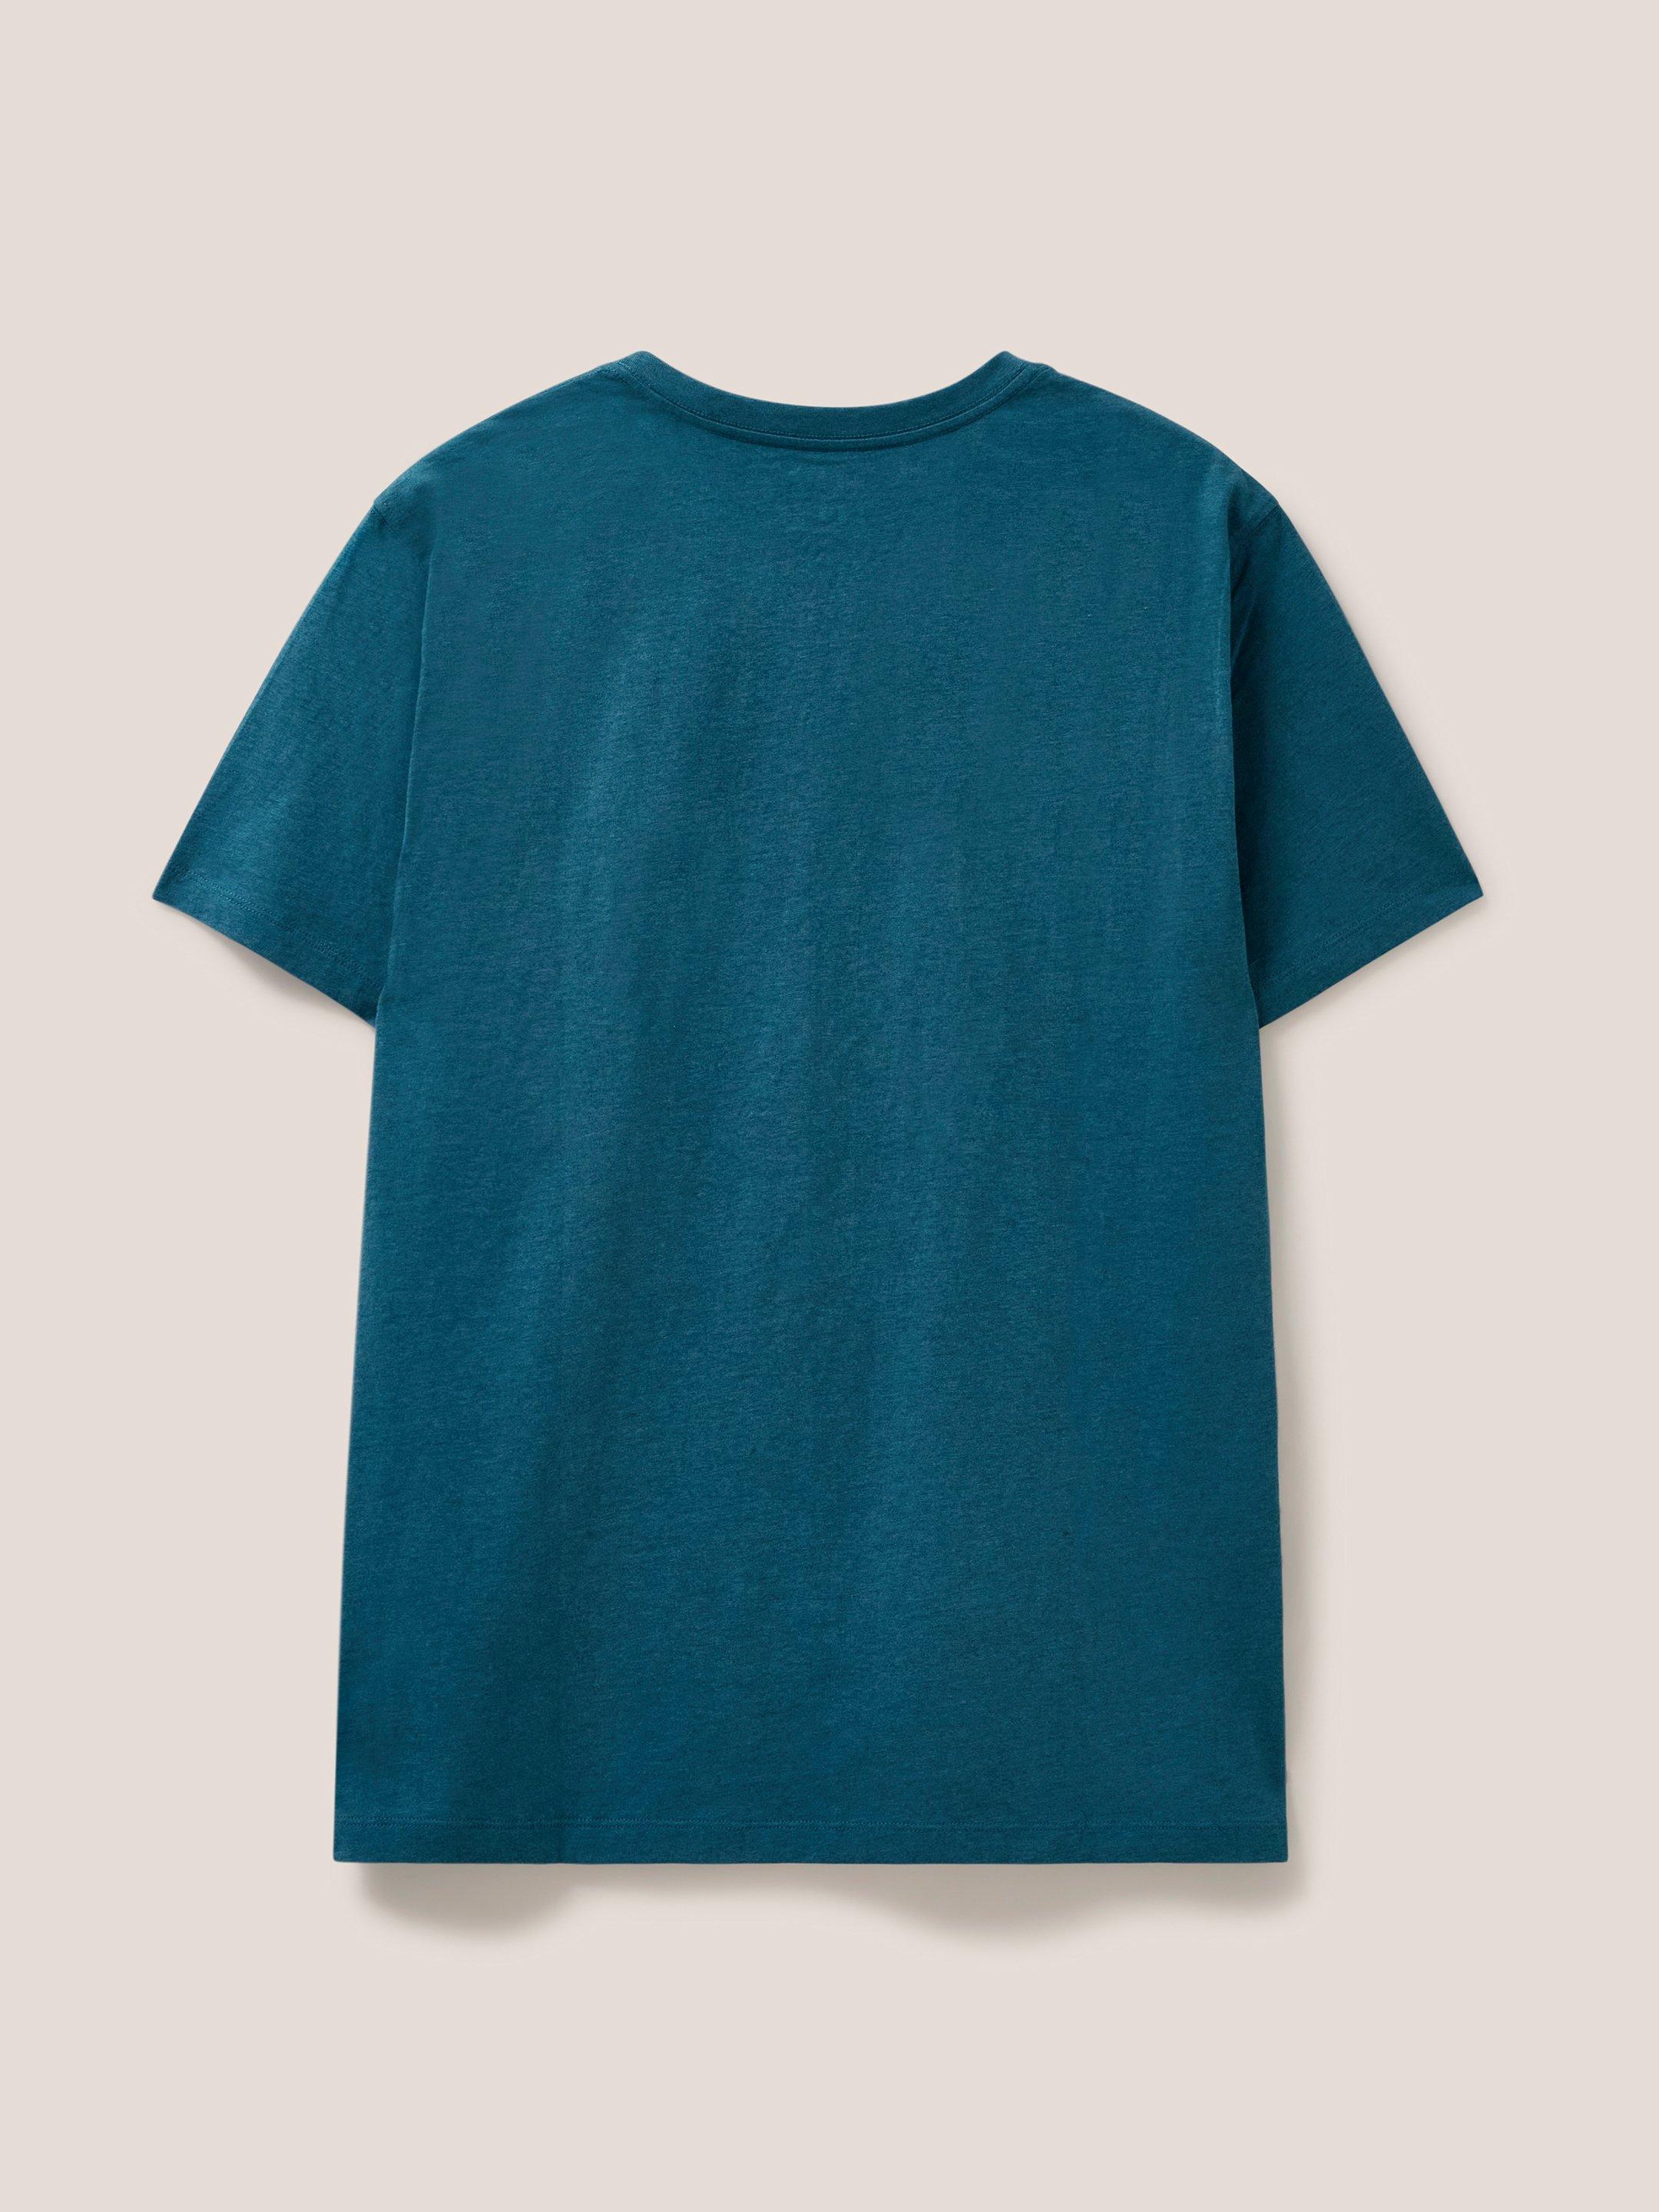 Pattern Fish Graphic Tshirt in MID TEAL - FLAT BACK